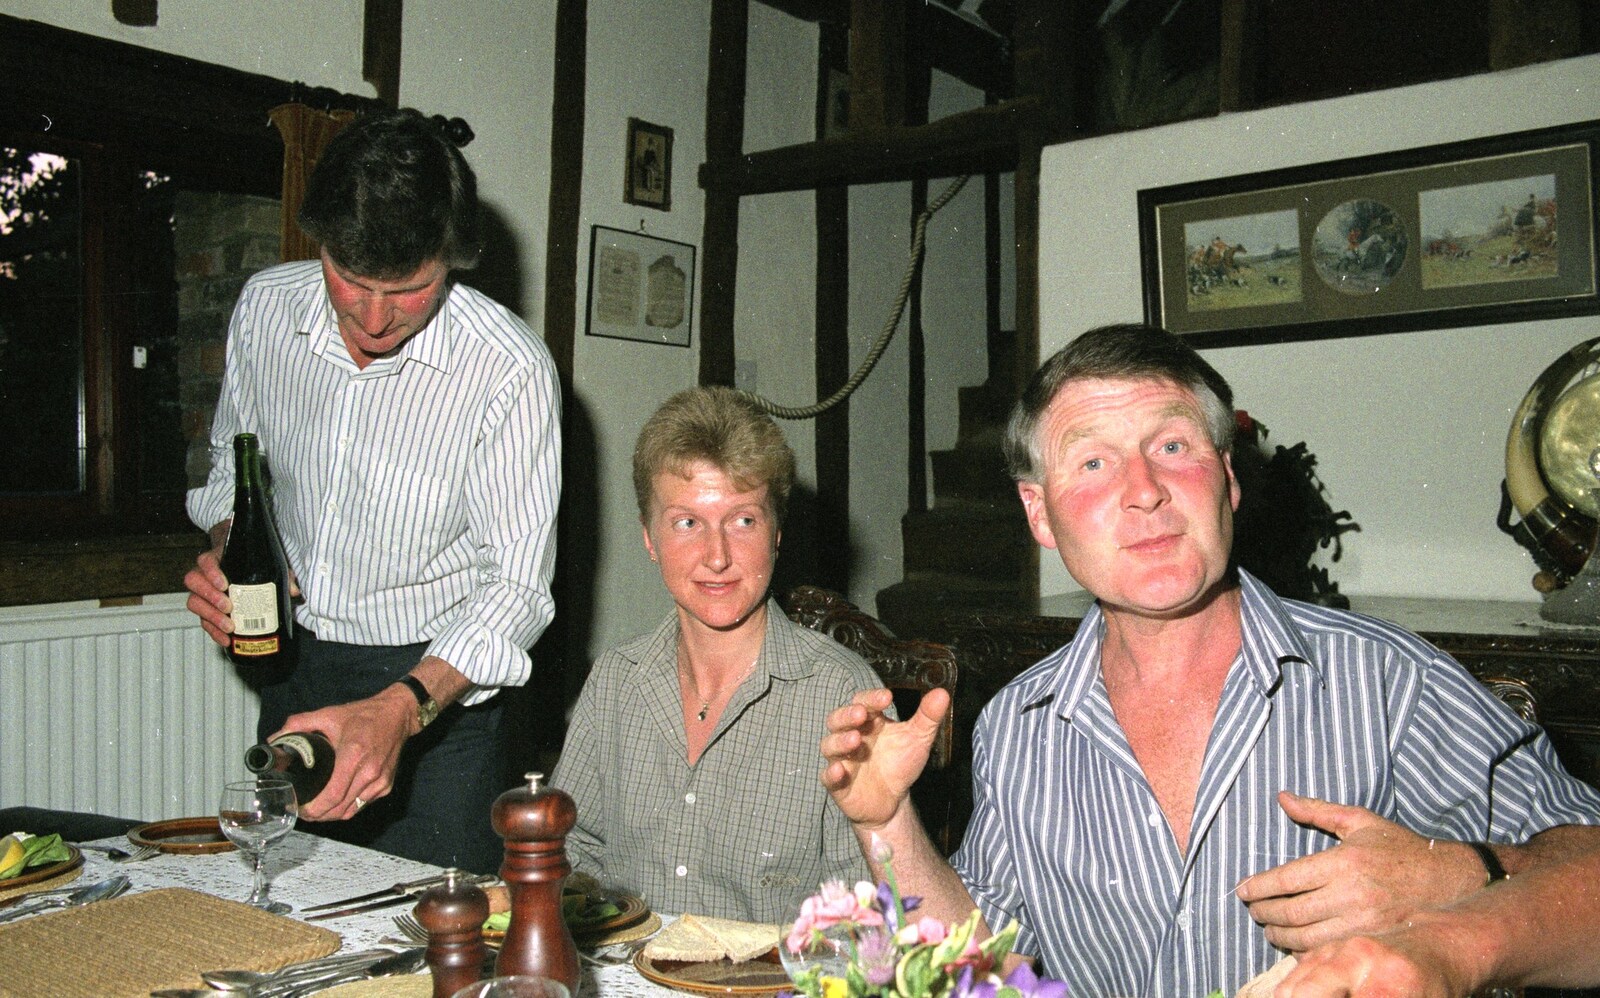 Geoff, Jan and Bernie from Tapestry With Baz, and a Trip to Blakeney, Suffolk and Norfolk - 14th May 1990